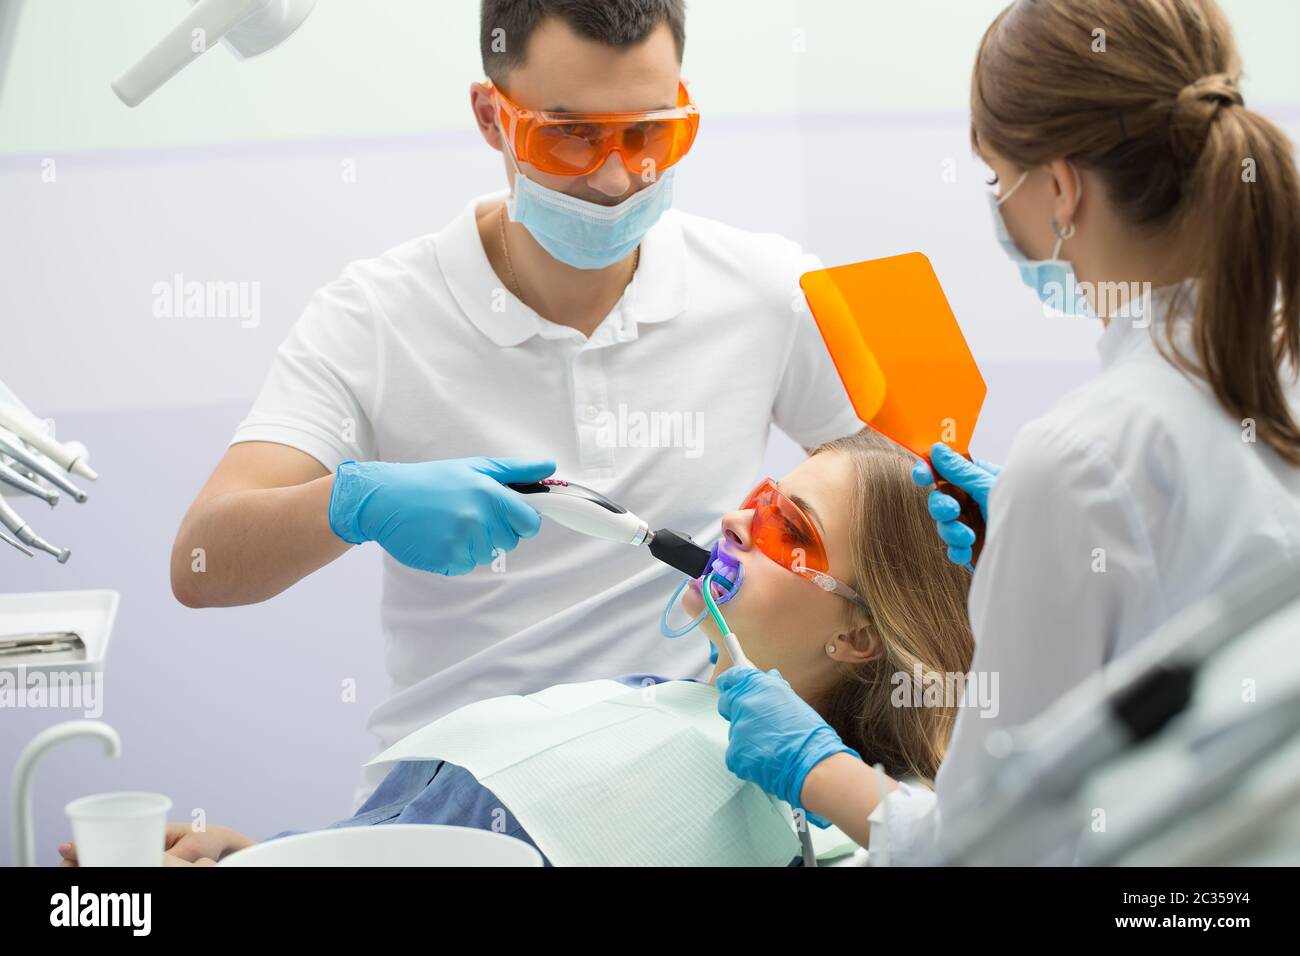 Tooth filling ultraviolet lamp Stock Photo